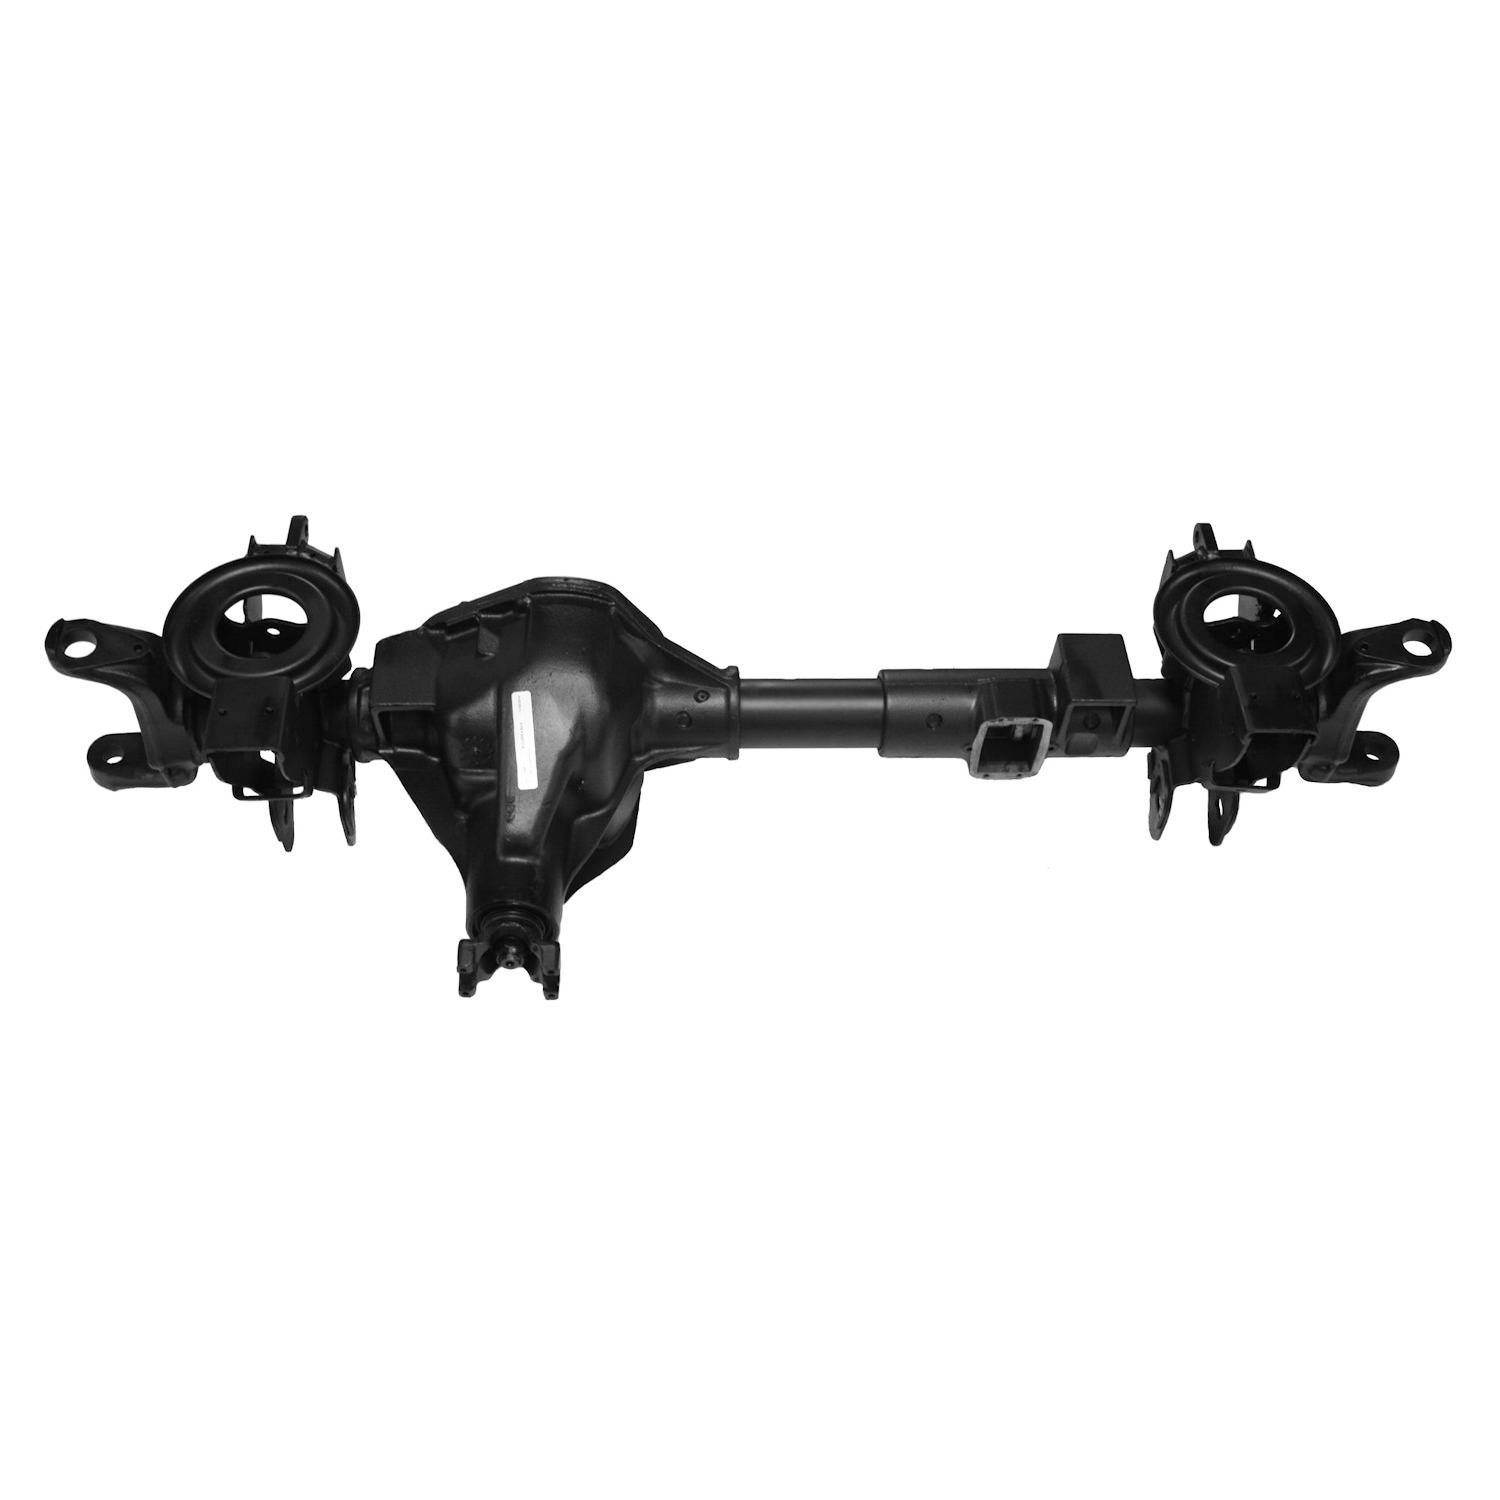 Remanufactured Complete Axle Assembly for Dana 60 1999 Ram 2500 4.11 with Rear Wheel ABS